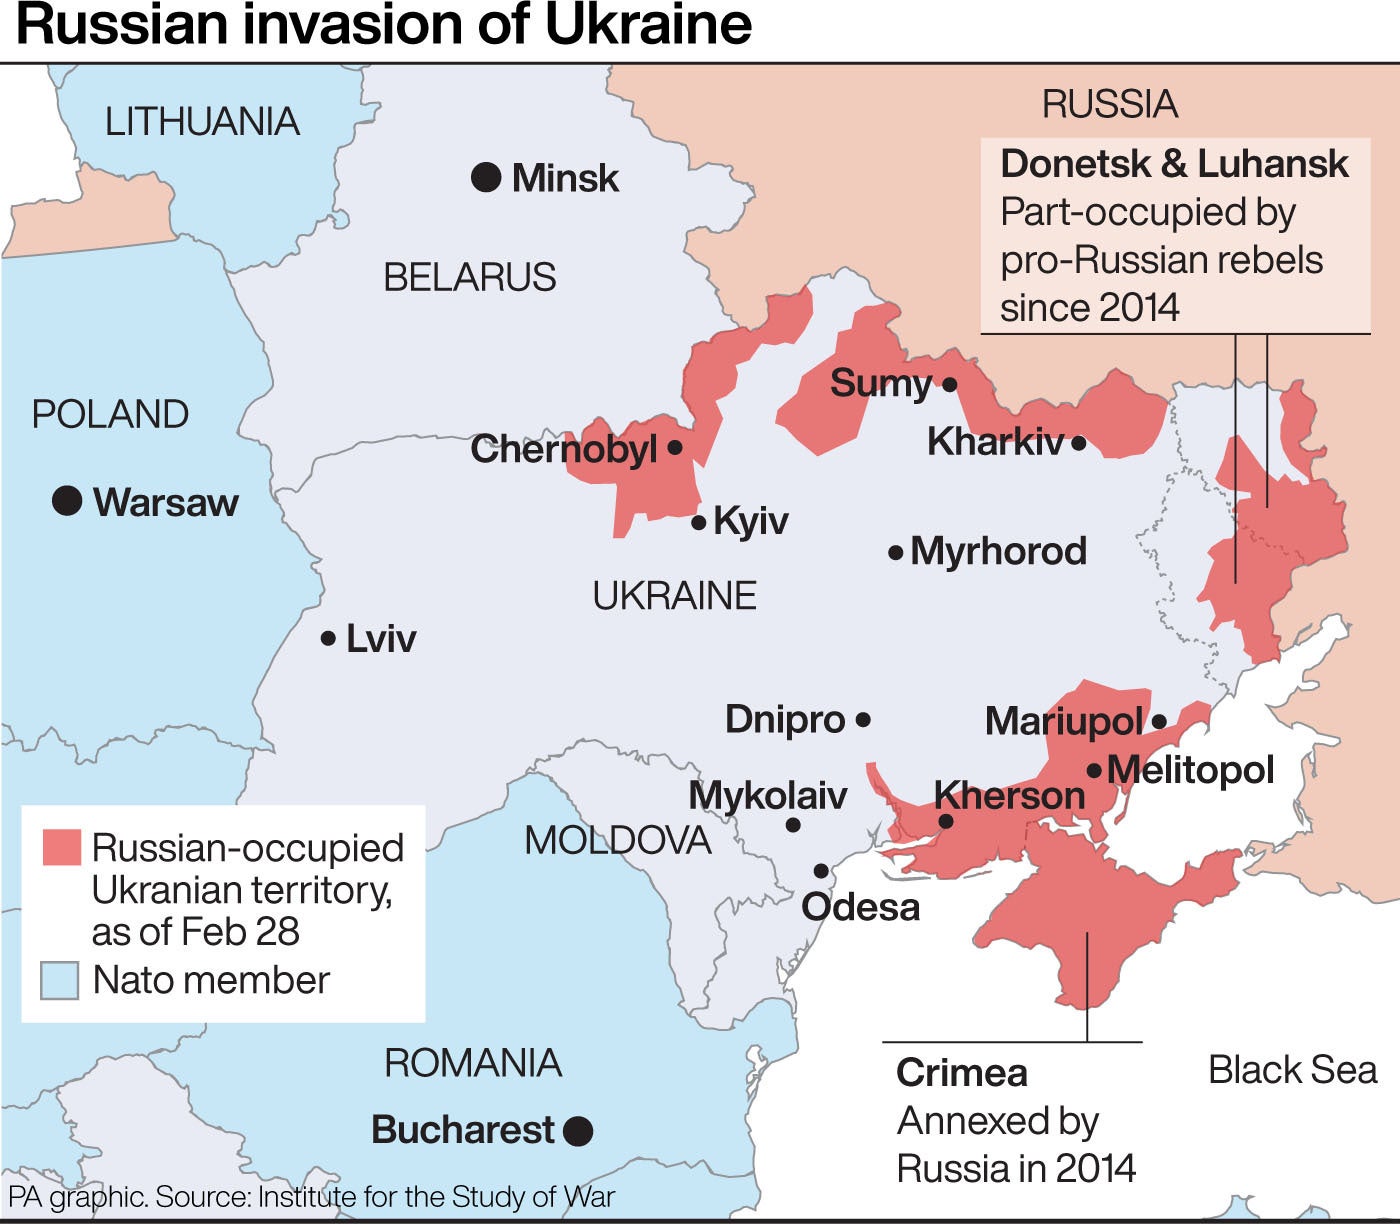 This map shows the extent of Russia’s attack on Ukraine